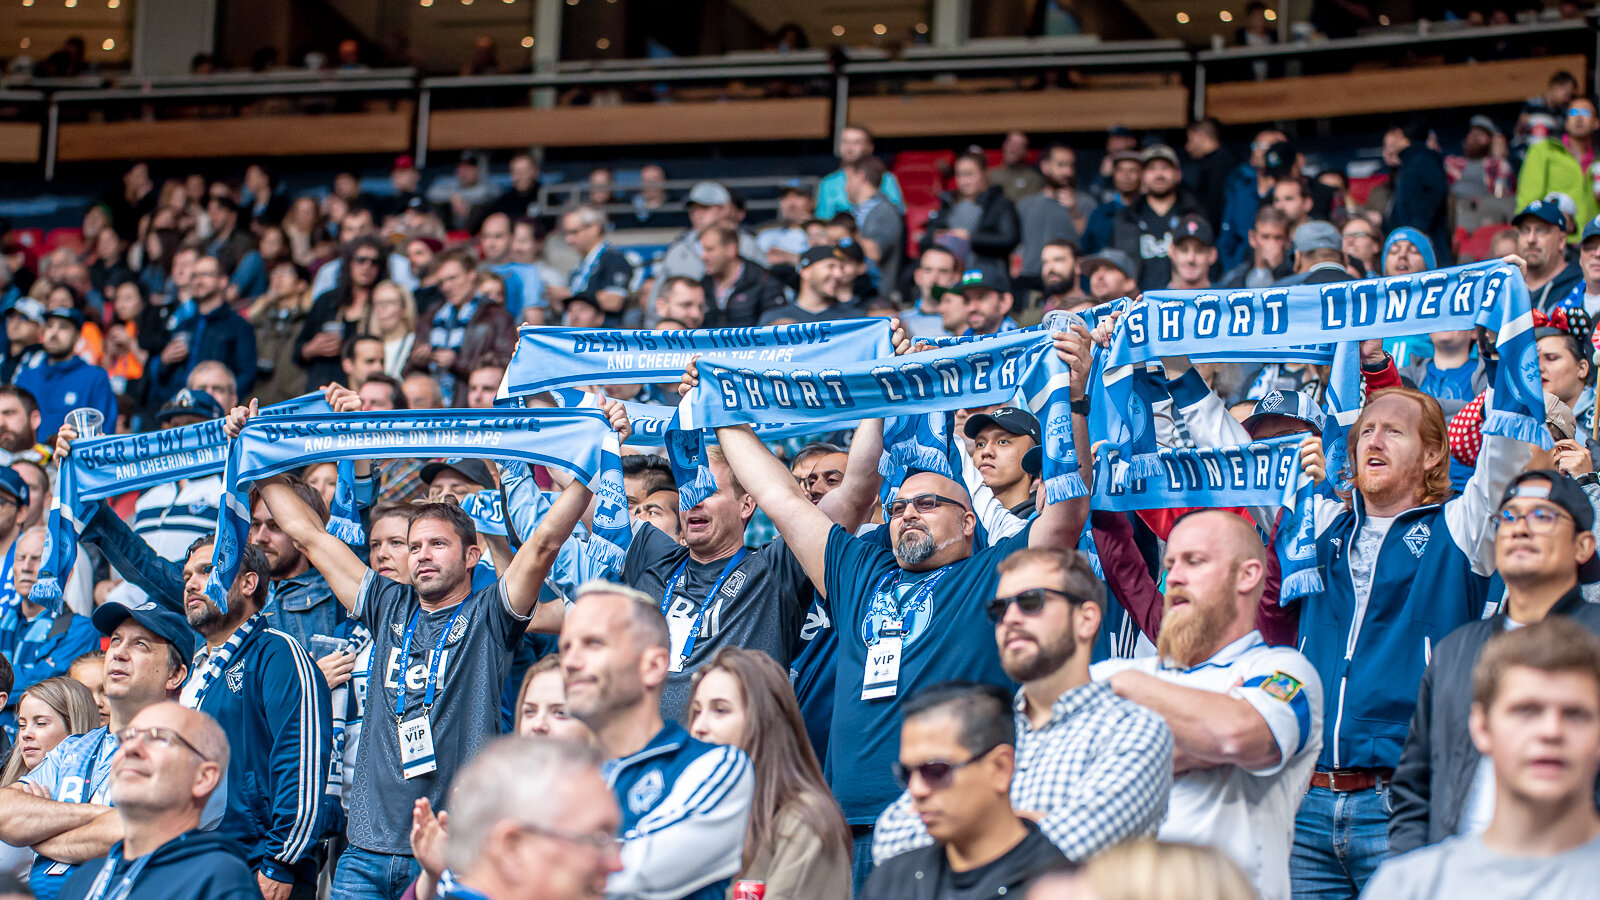 2019-10-06 Vancouver Whitecaps FC Supporters.jpg